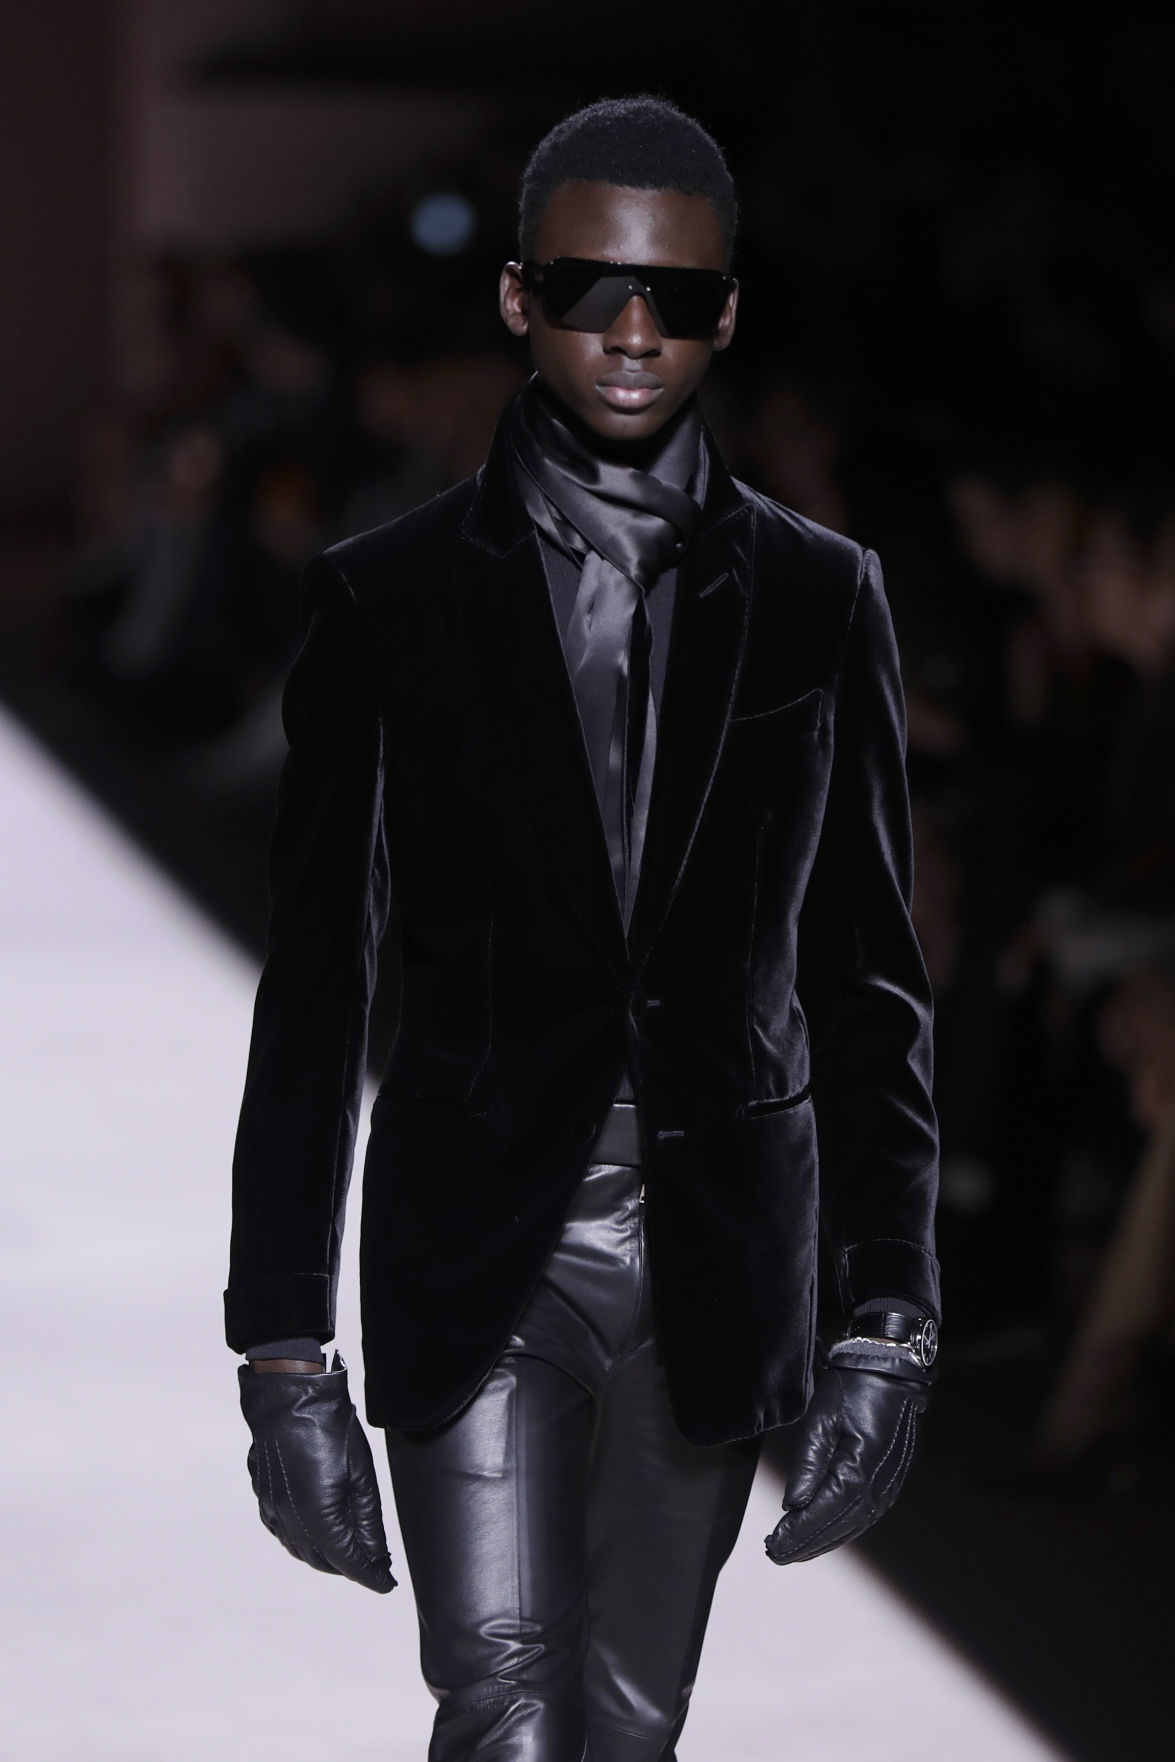 Big hats and simple elegance for Tom Ford at NY Fashion Week ...